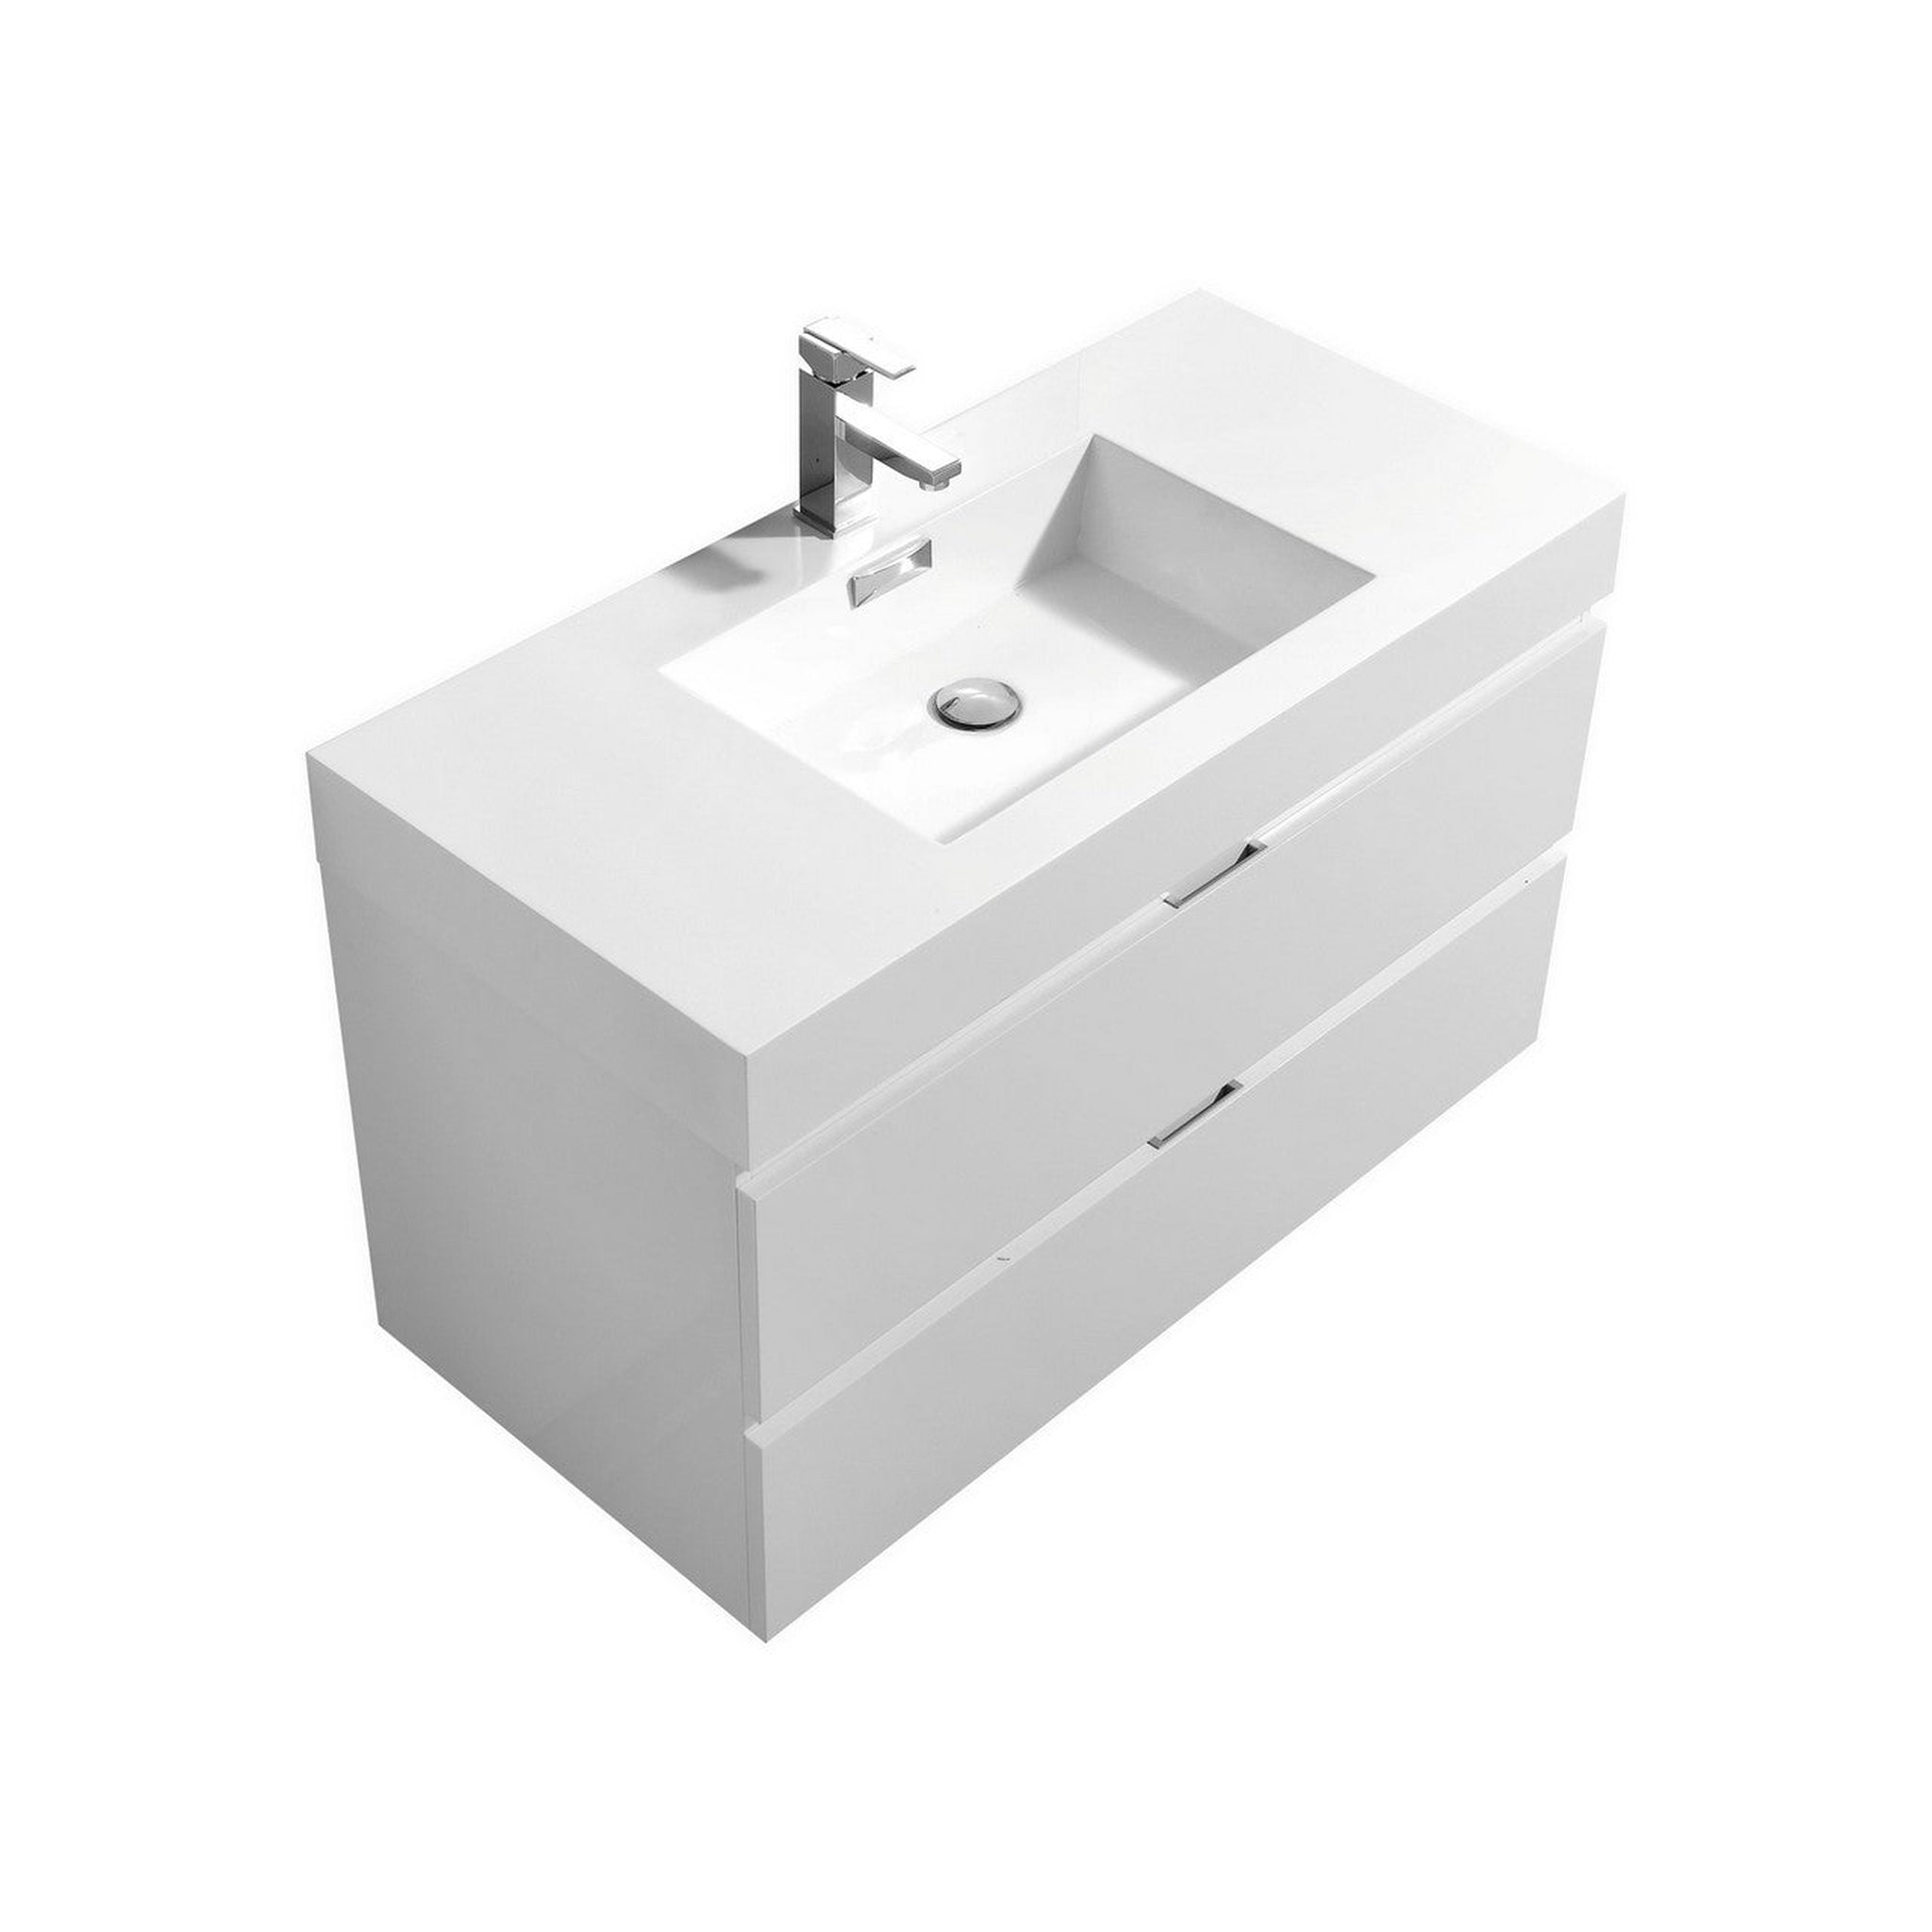 KubeBath, KubeBath Bliss 40" High Gloss White Wall-Mounted Modern Bathroom Vanity With Single Integrated Acrylic Sink With Overflow and 36" White Framed Mirror With Shelf